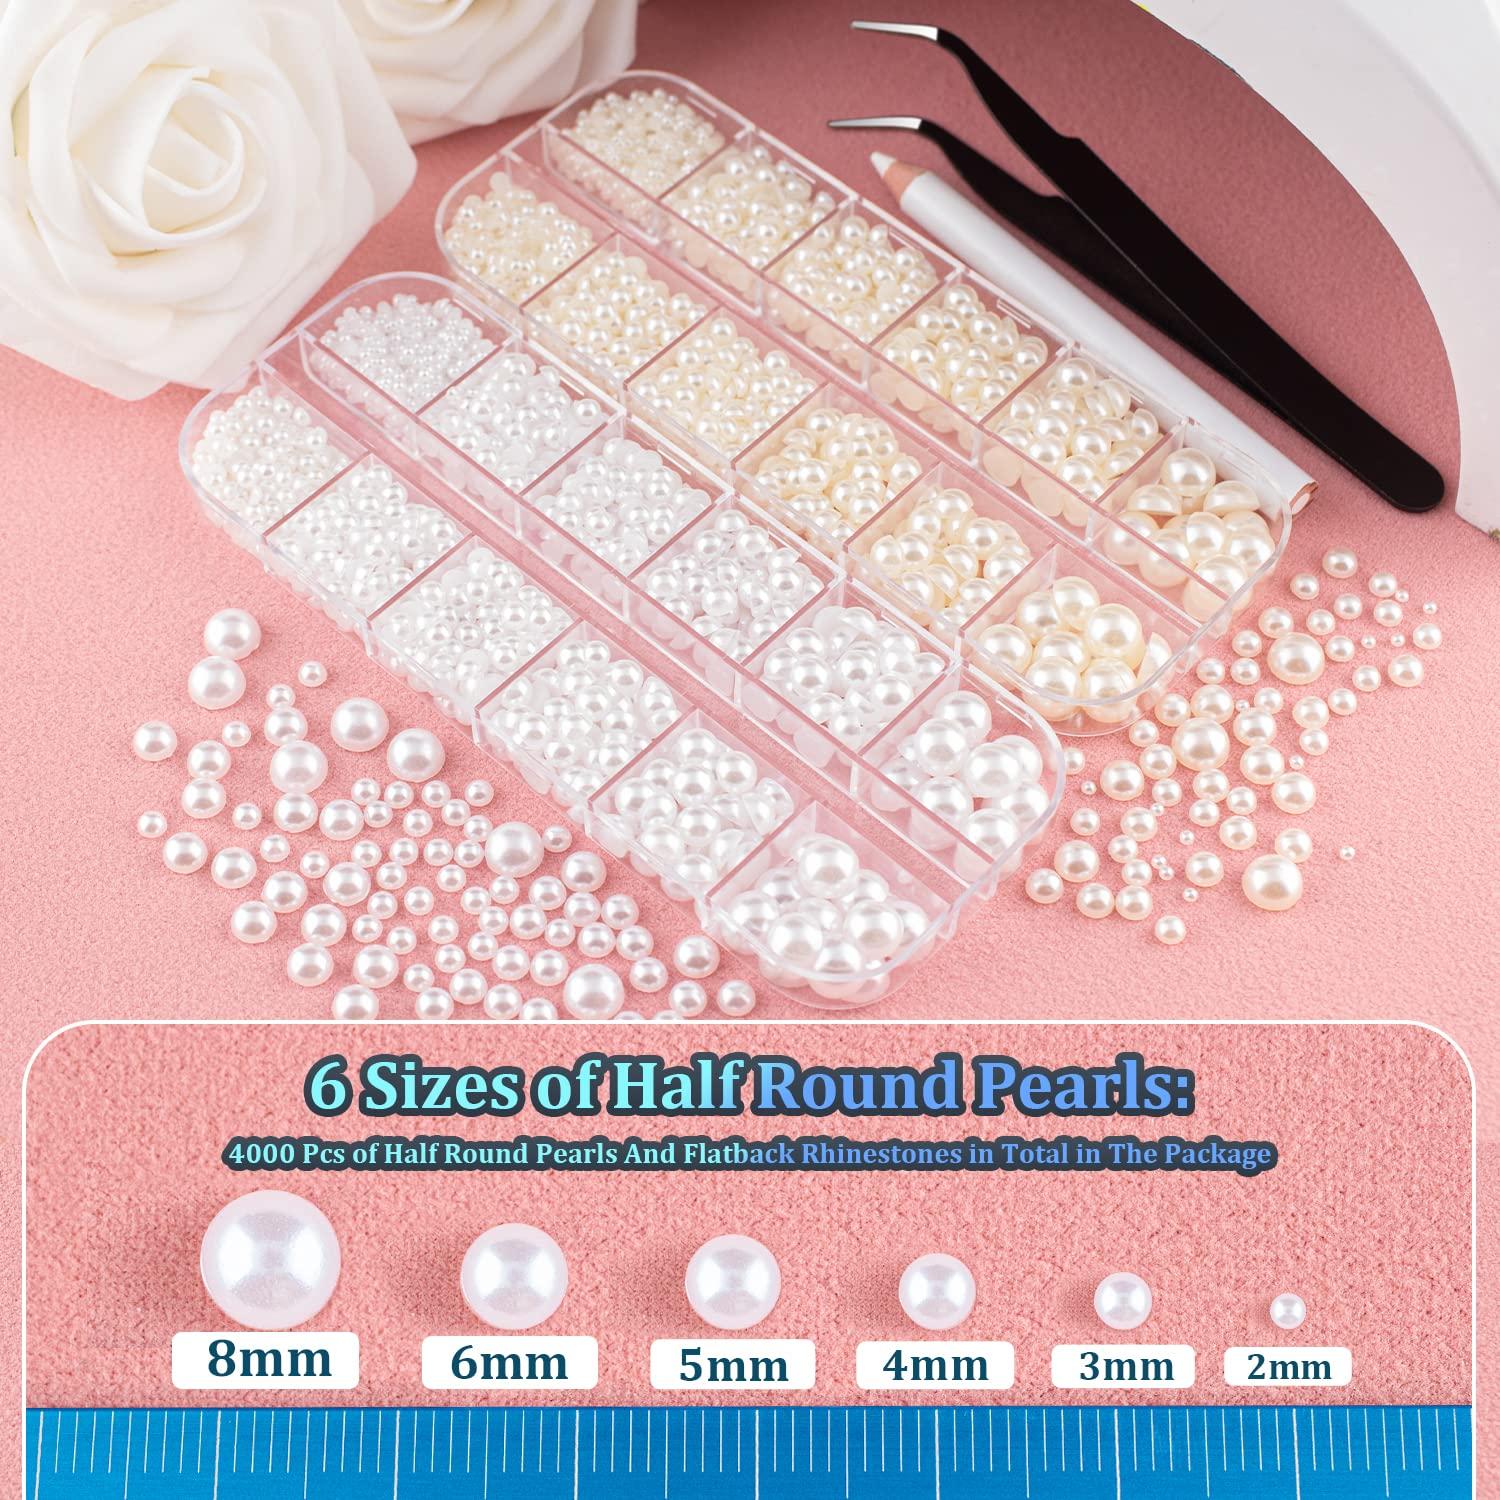 12900Pcs Half Pearl with Rhinestone Craft Glue, Flatback Pearls Beads White  AB Assorted Size 3/4/5/6/8/10mm Craft Pearls Round Rhinestones for Makeup